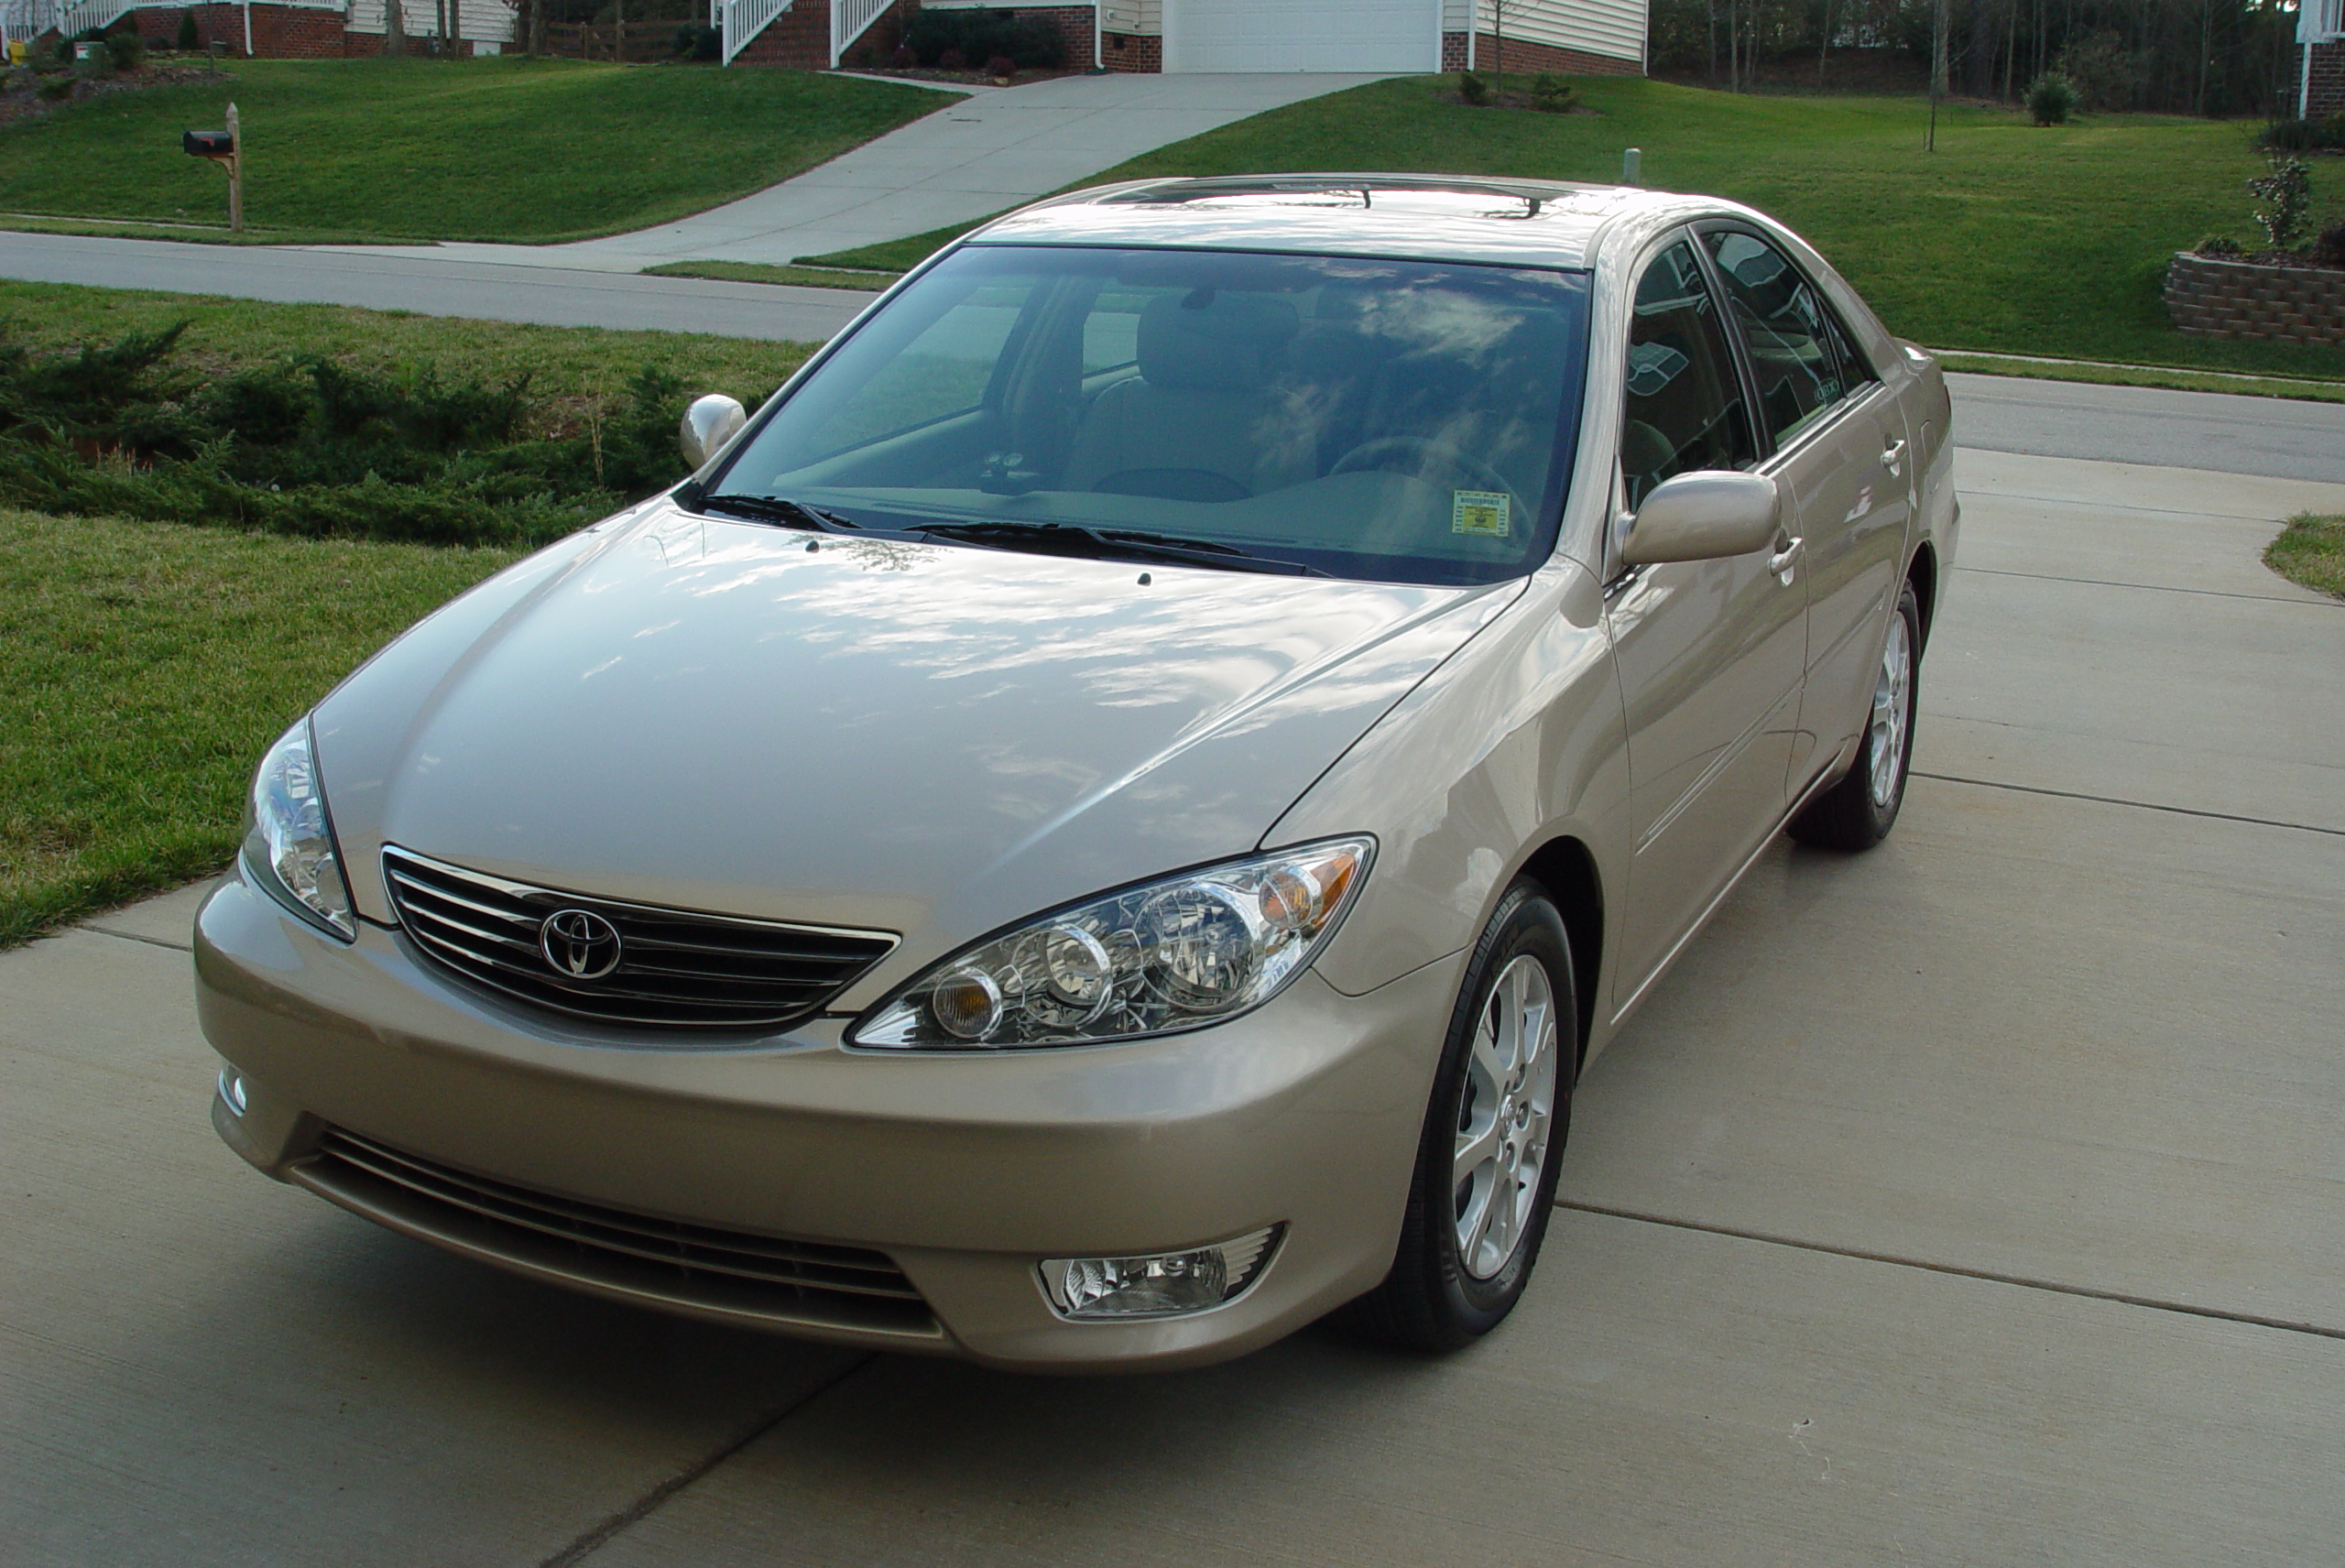 2005 Toyota Camry Information and photos MOMENTcar